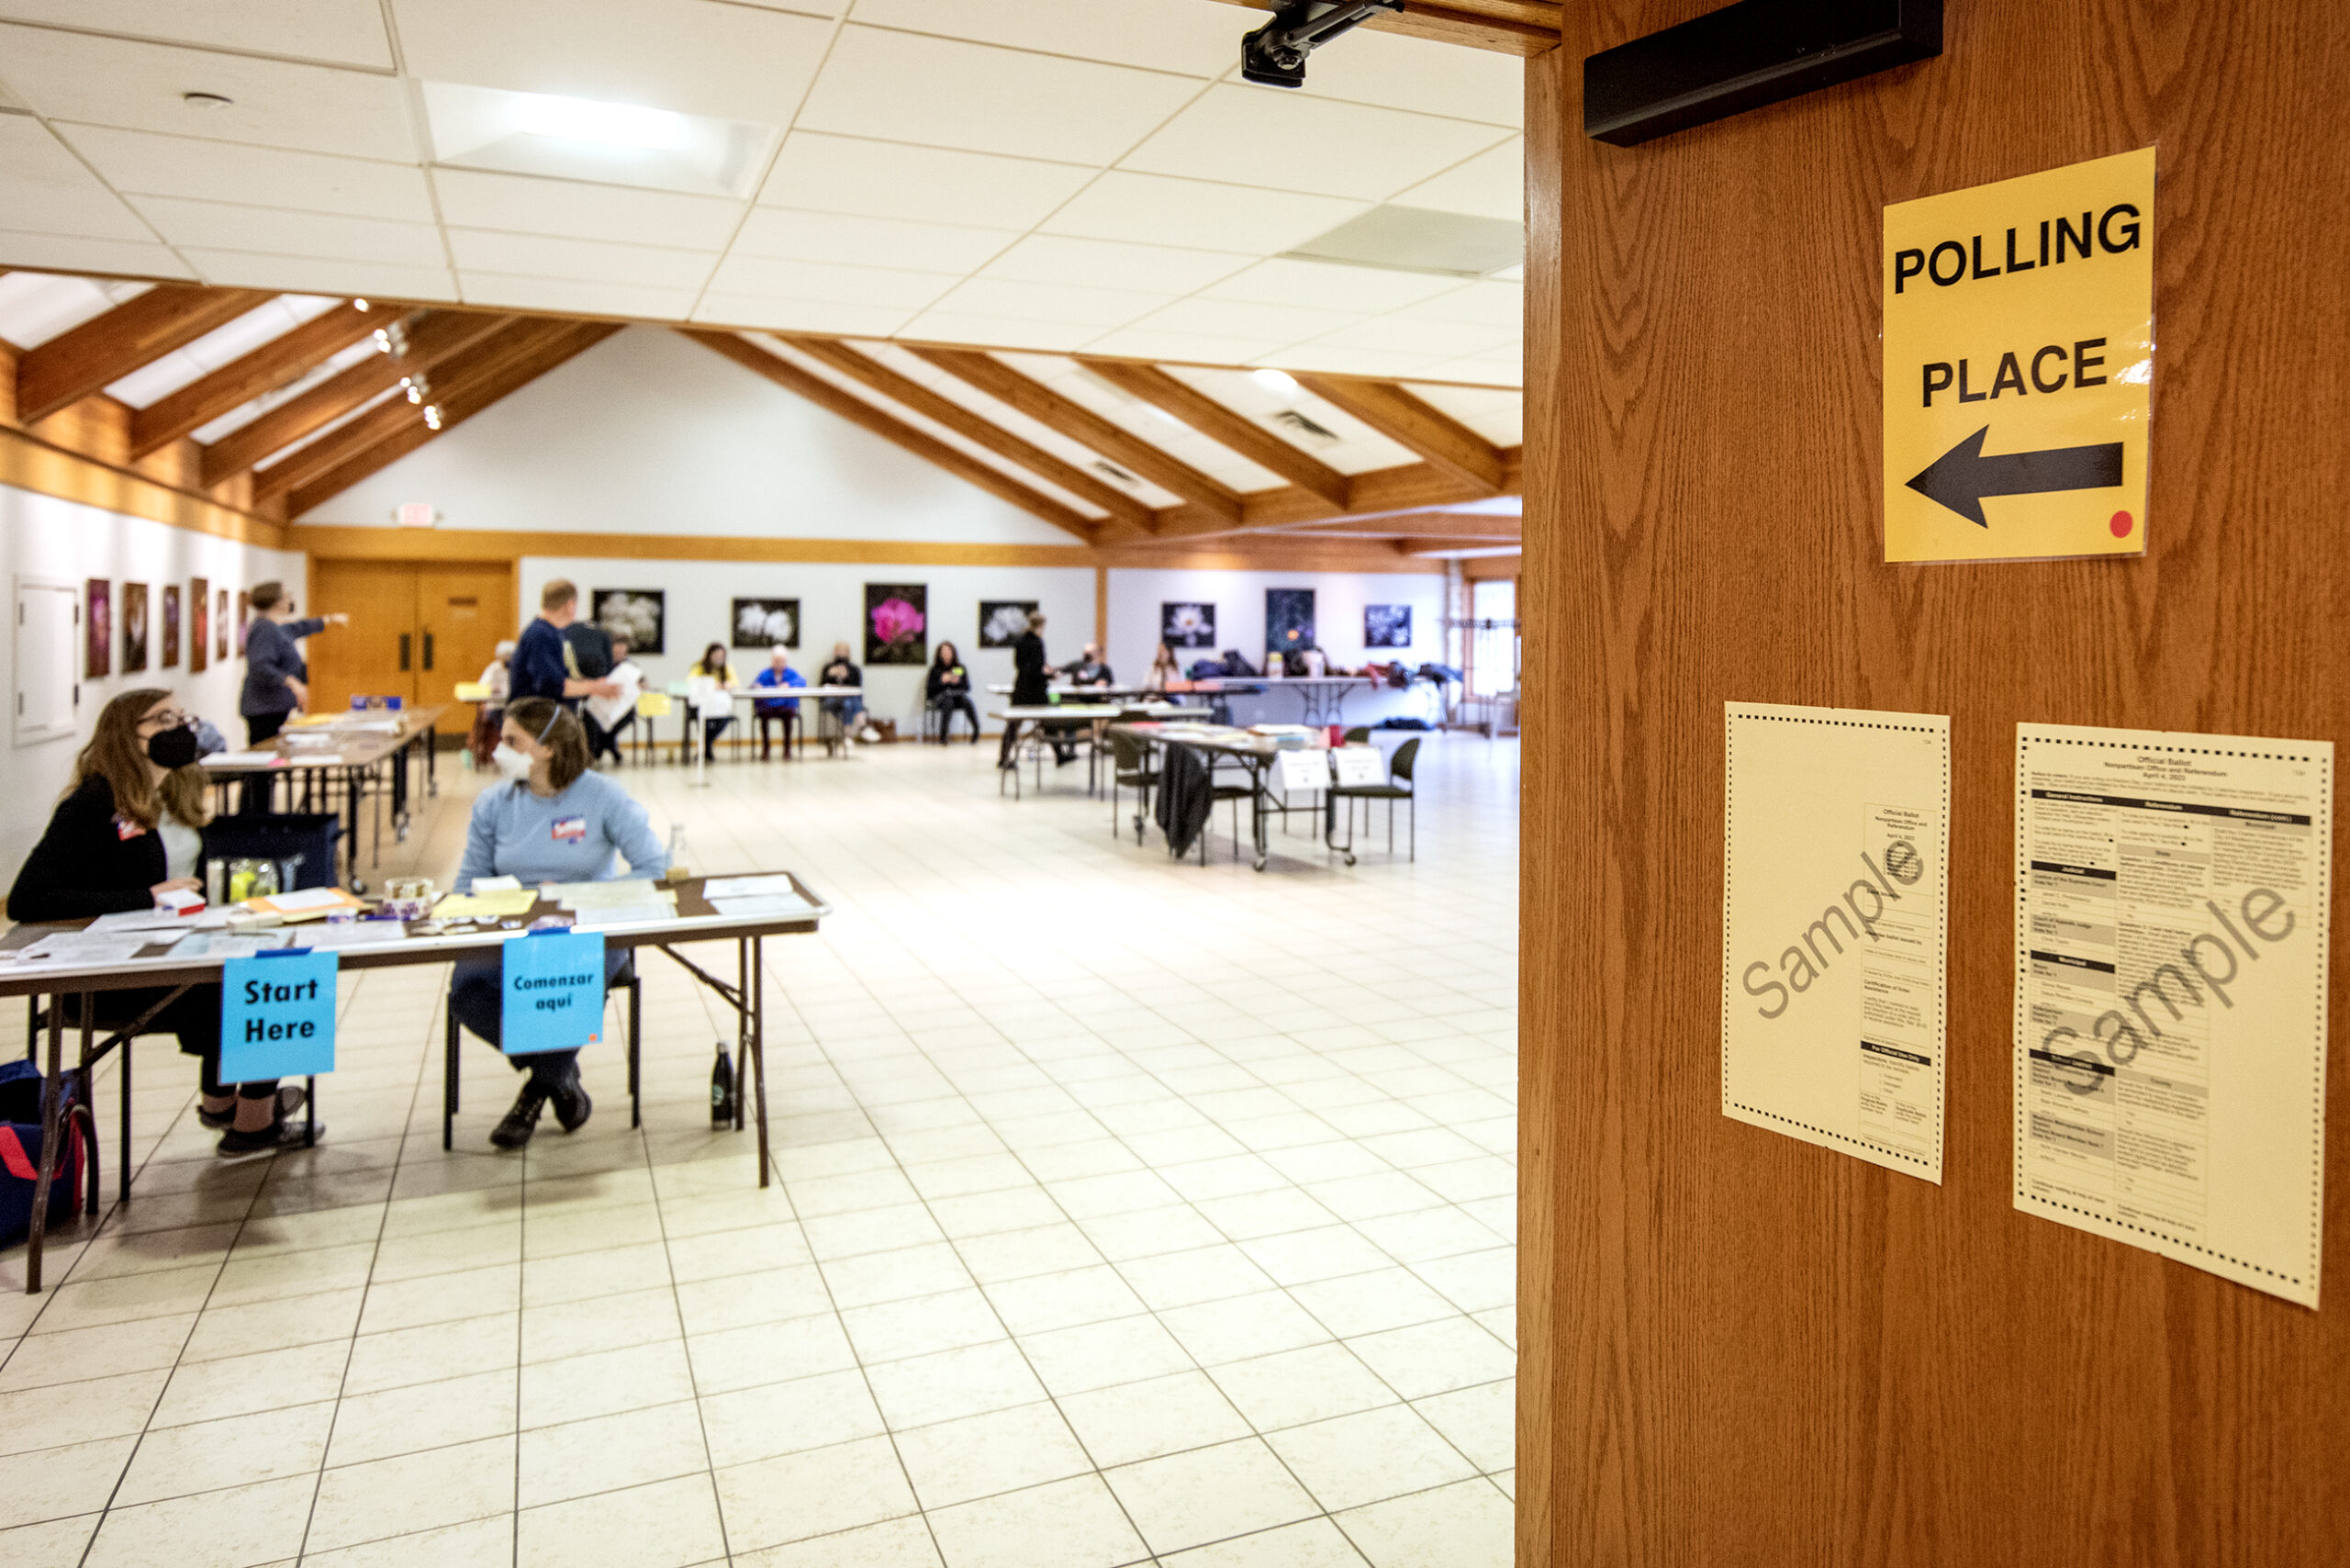 A sign says "Polling Place" with an arrow into a room where workers sit at tables.